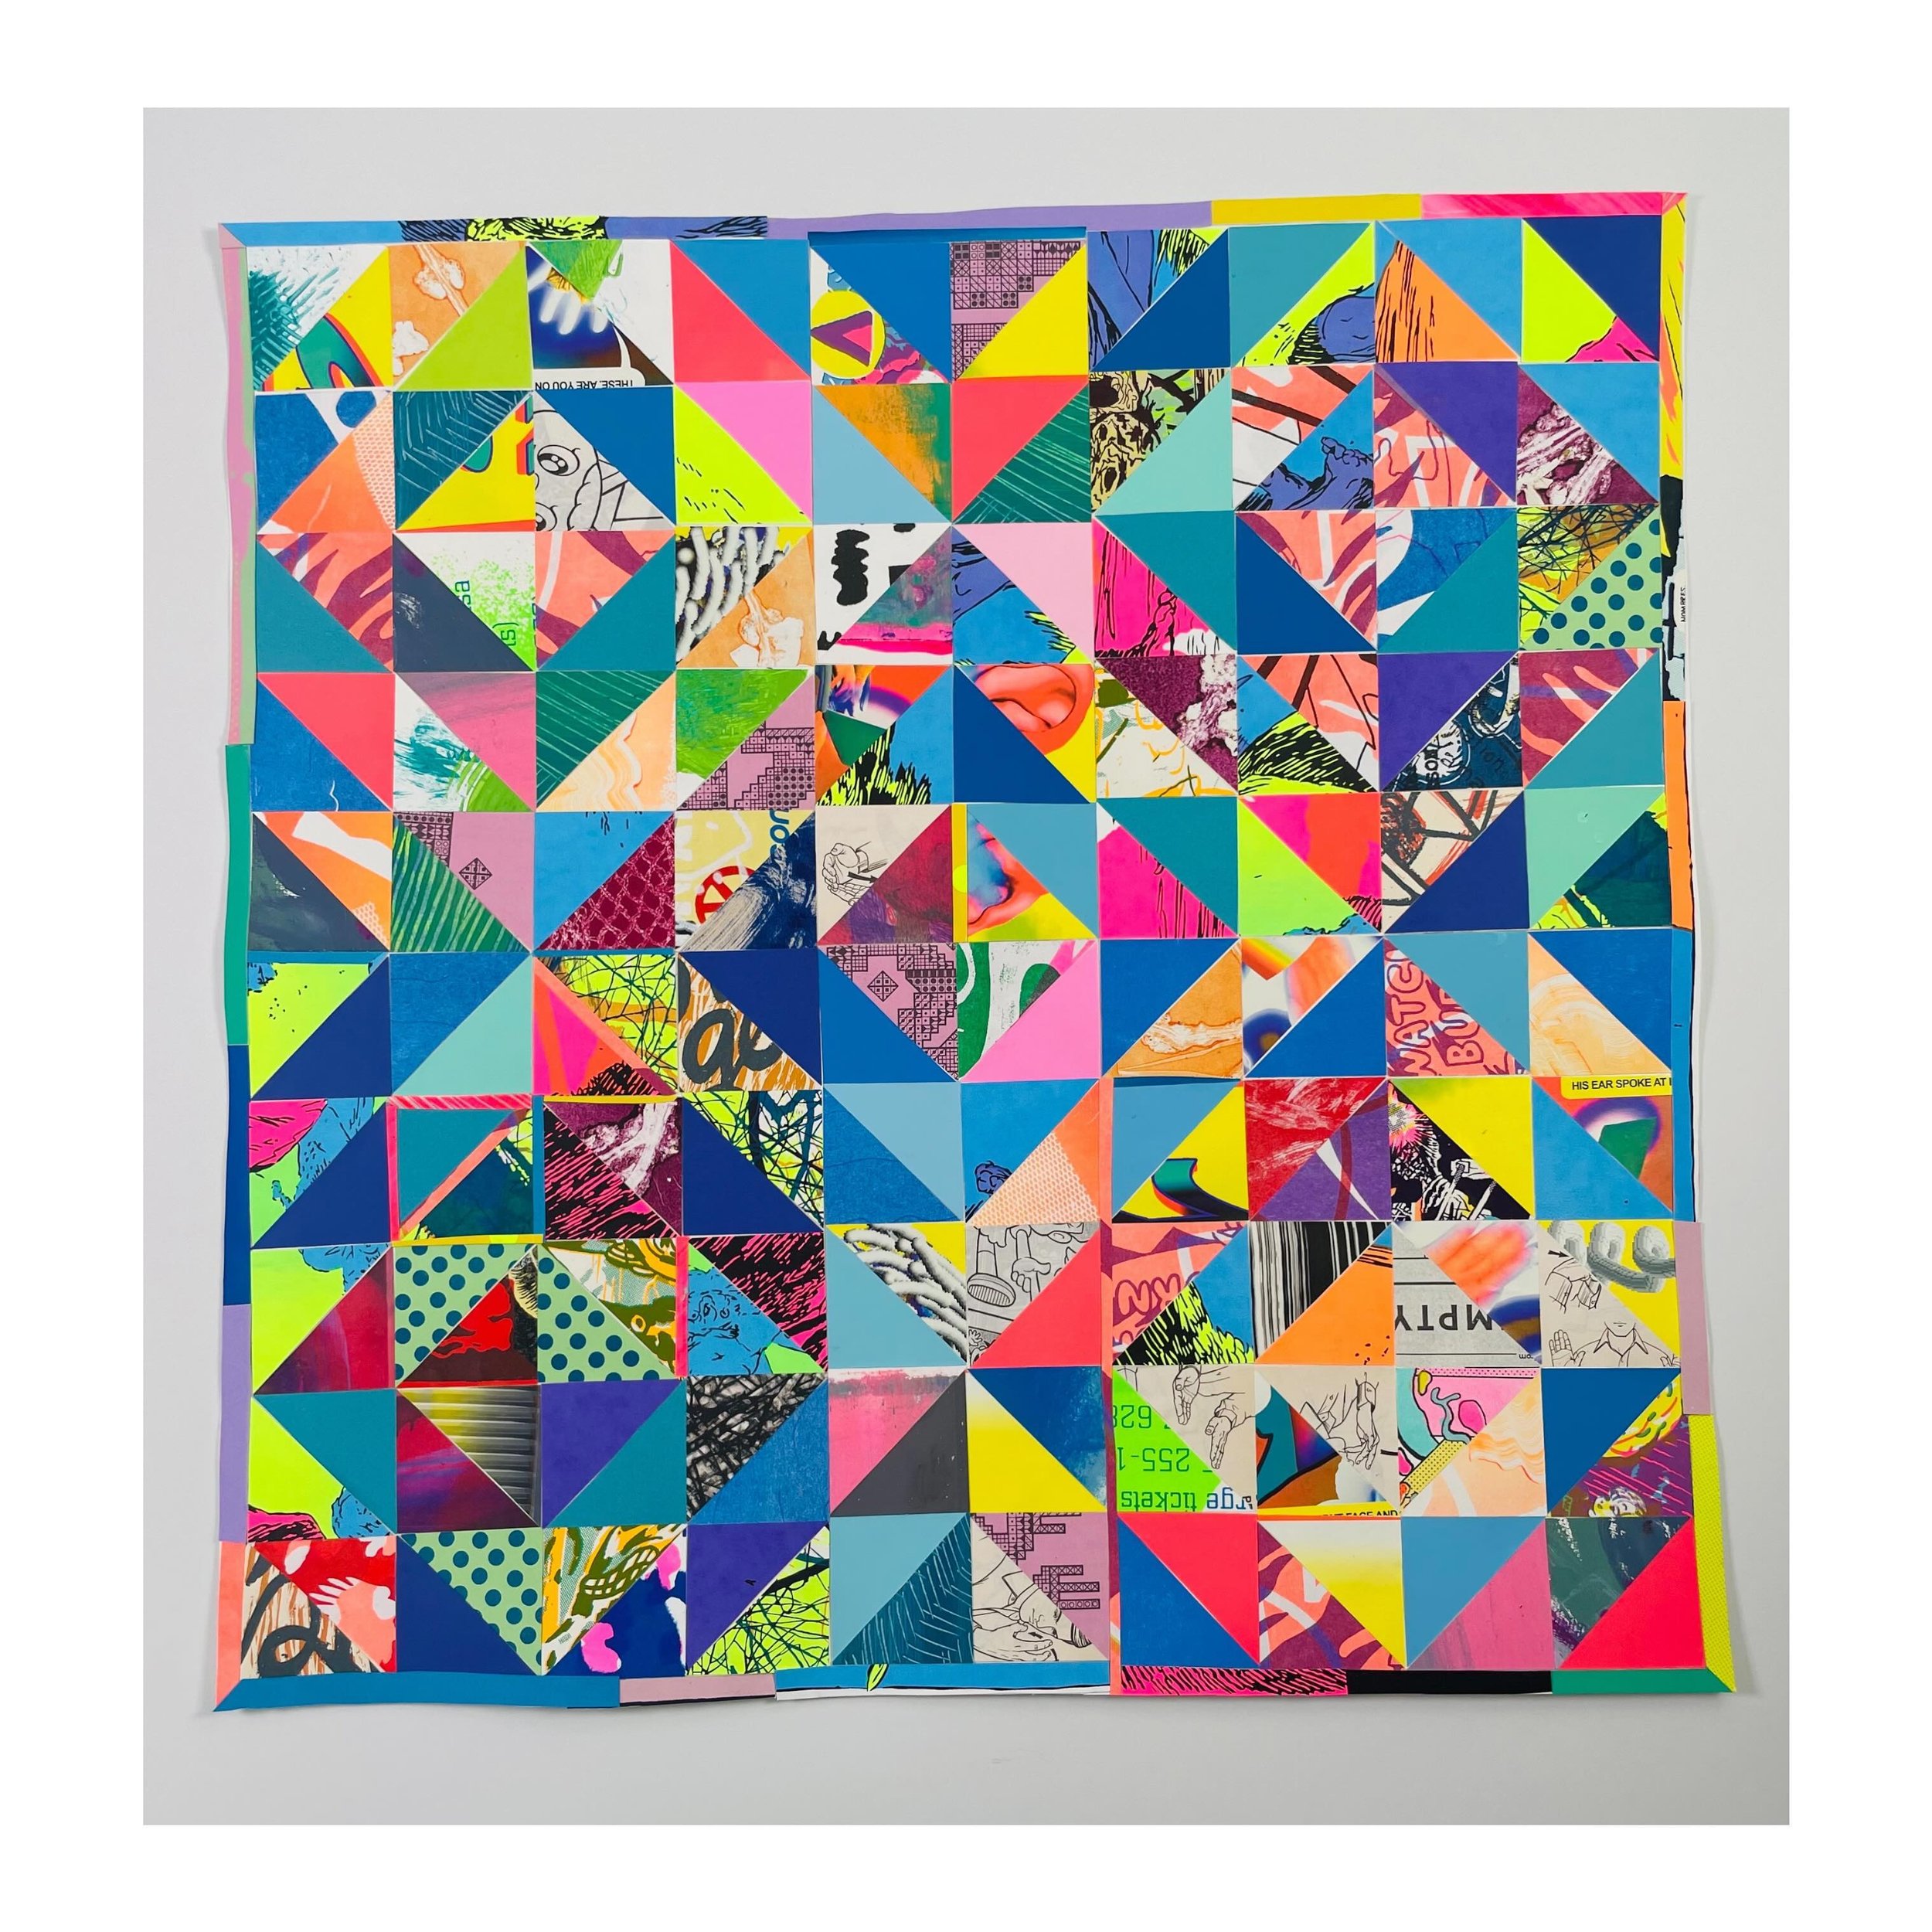 A few collage quilt works are back in my studio and available. Reach out for inquiries and details. 🌈 can be shipped! Crazy chalkboard wall not included haha

Pattern Language 2
Collage on archival paper
26&rdquo; x 26&rdquo; custom framed 
2022
.
.